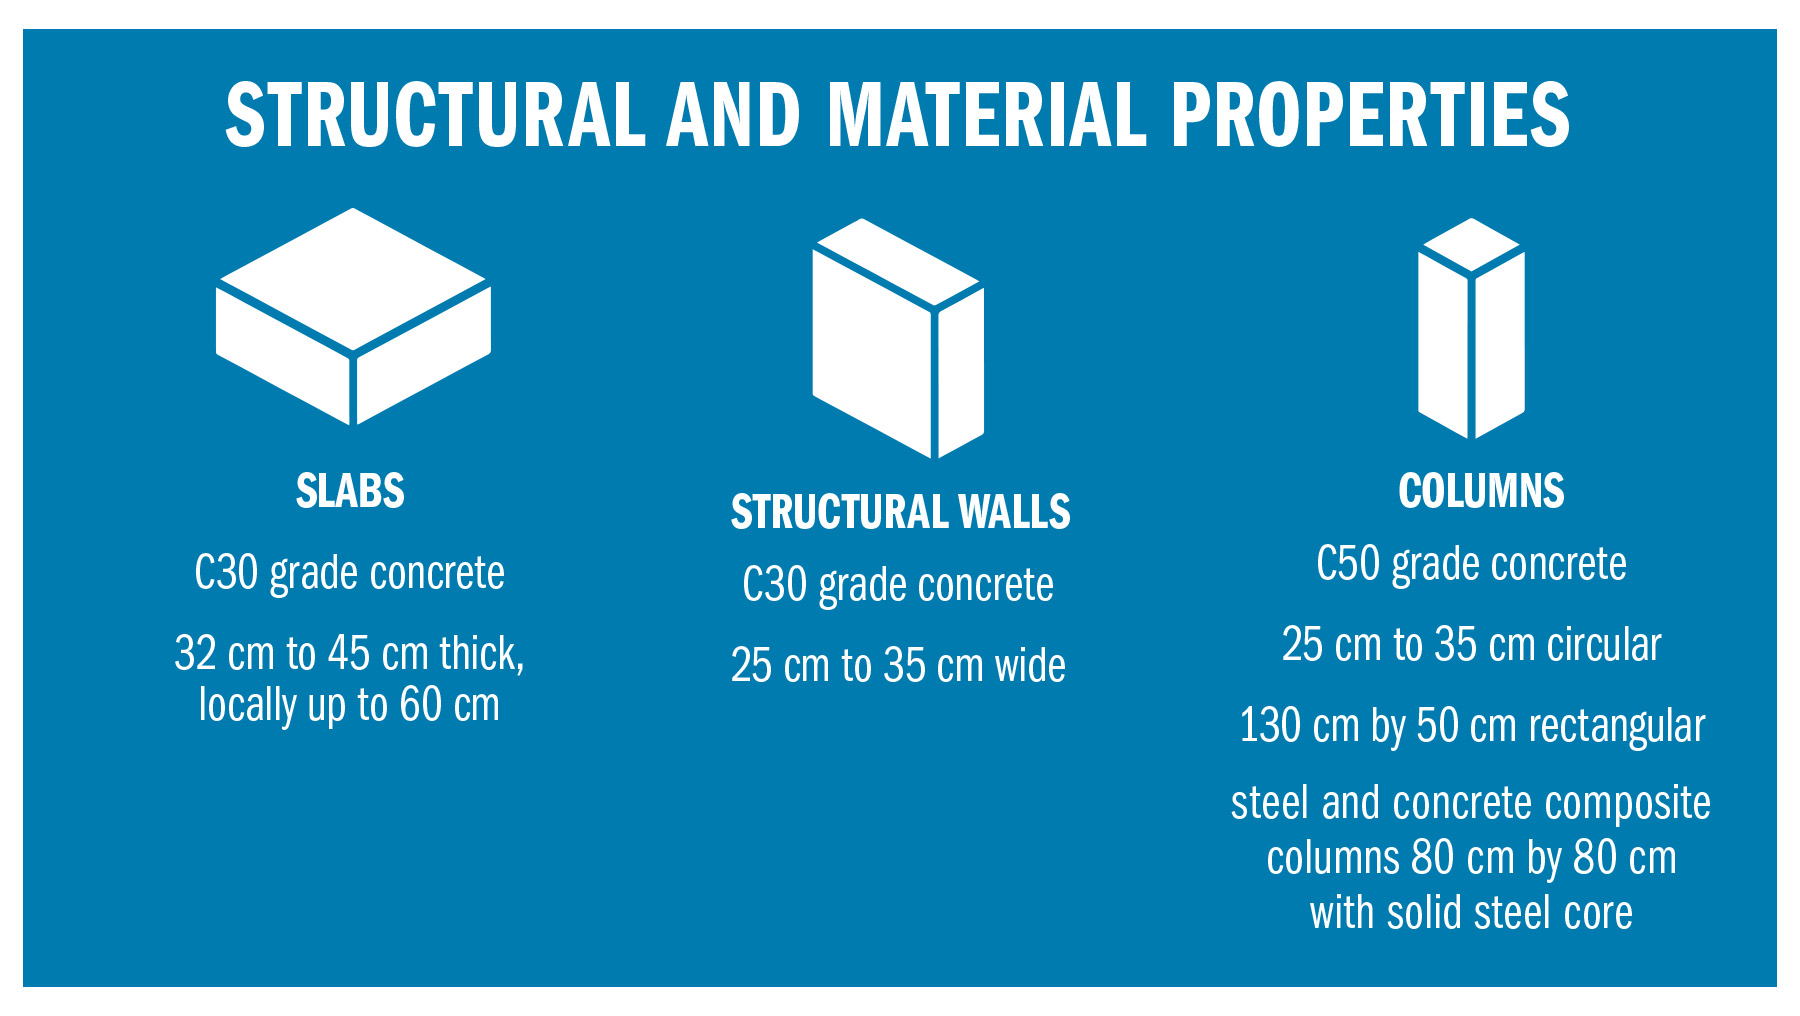 The graphic shows the specs for the slabs, structural walls, and columns. 